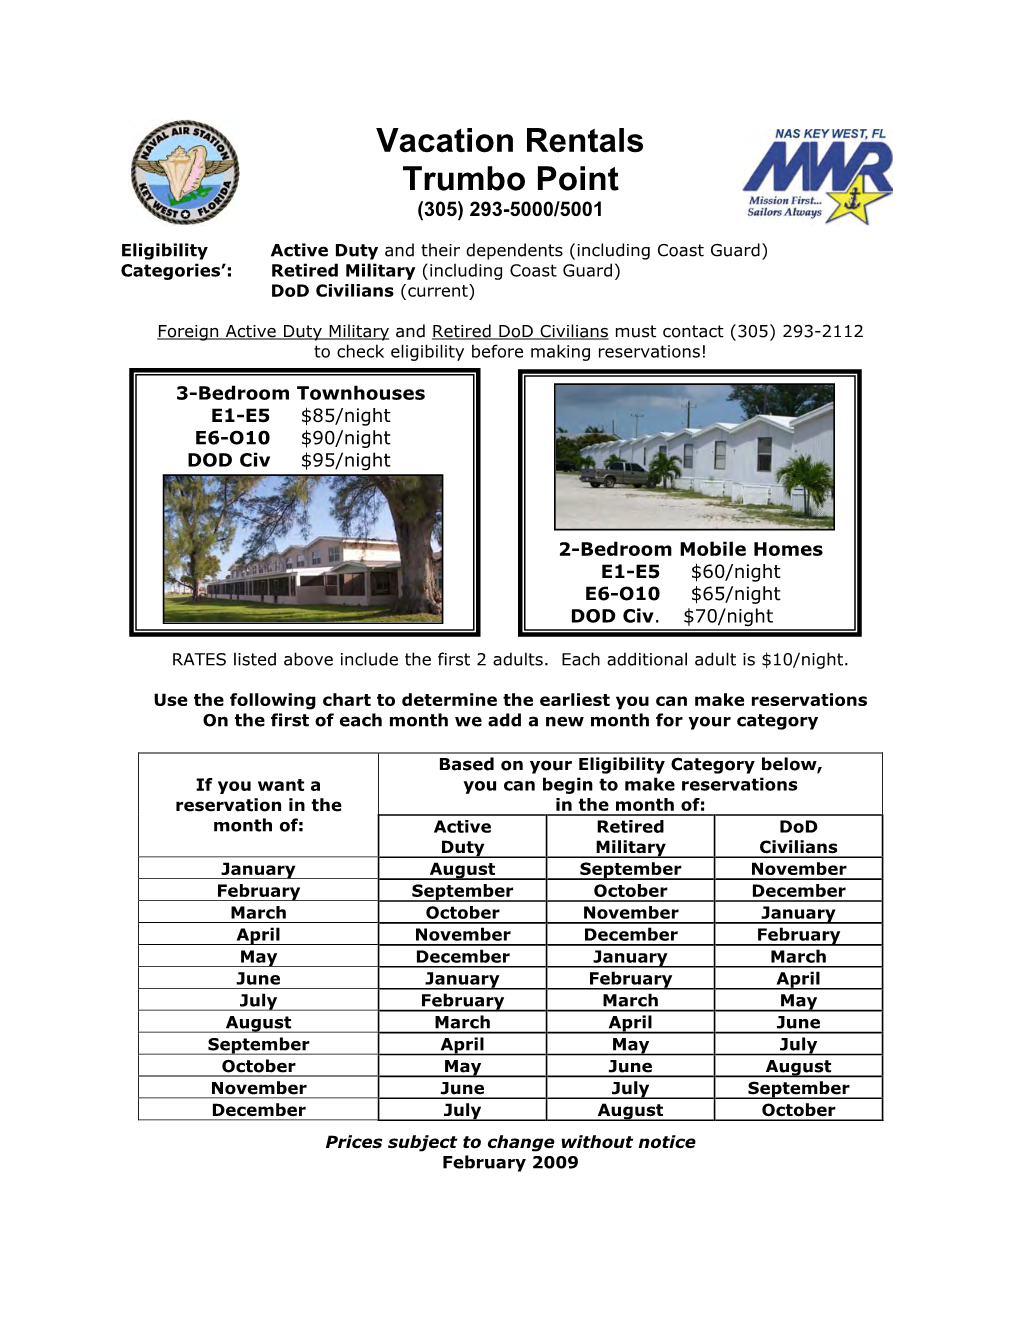 Vacation Rentals Trumbo Point (305) 293-5000/5001